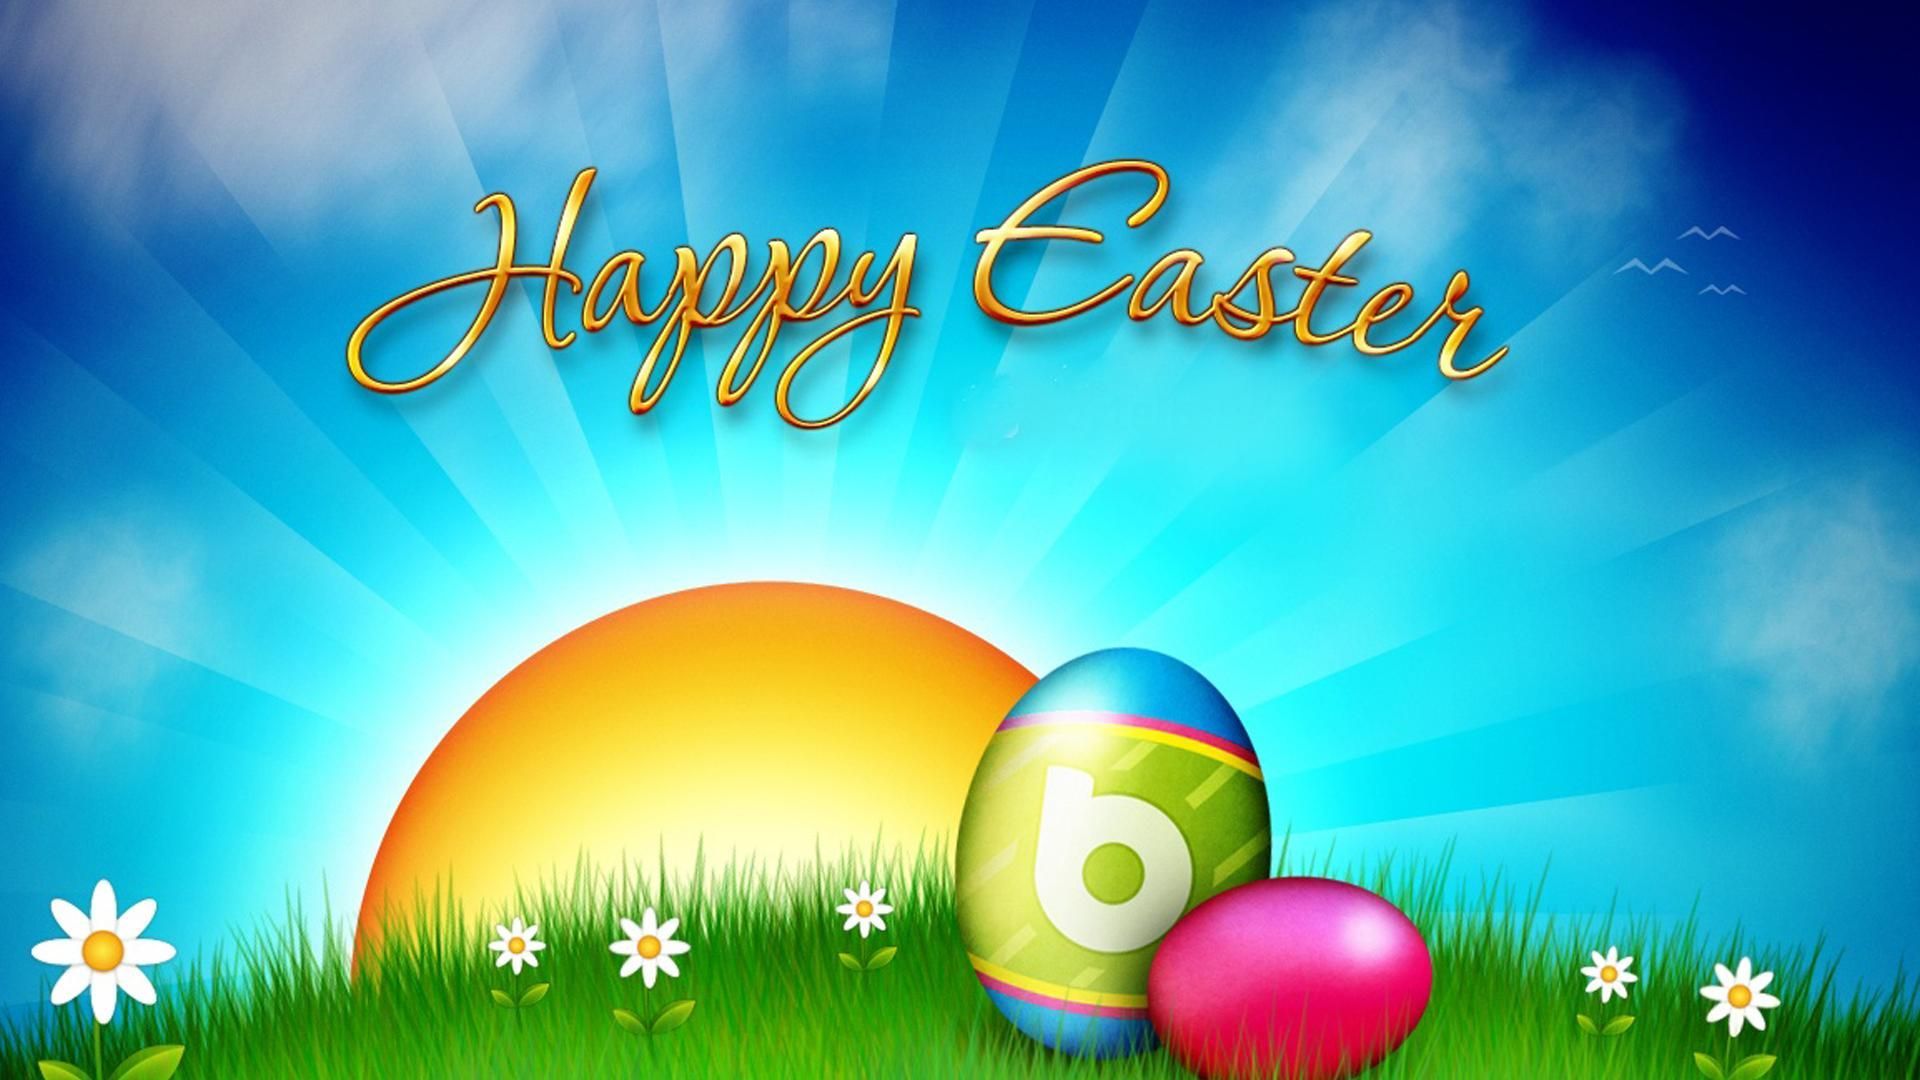 Happy Easter Wallpaper - Easter Sunday Background Hd - 1920x1080 Wallpaper  